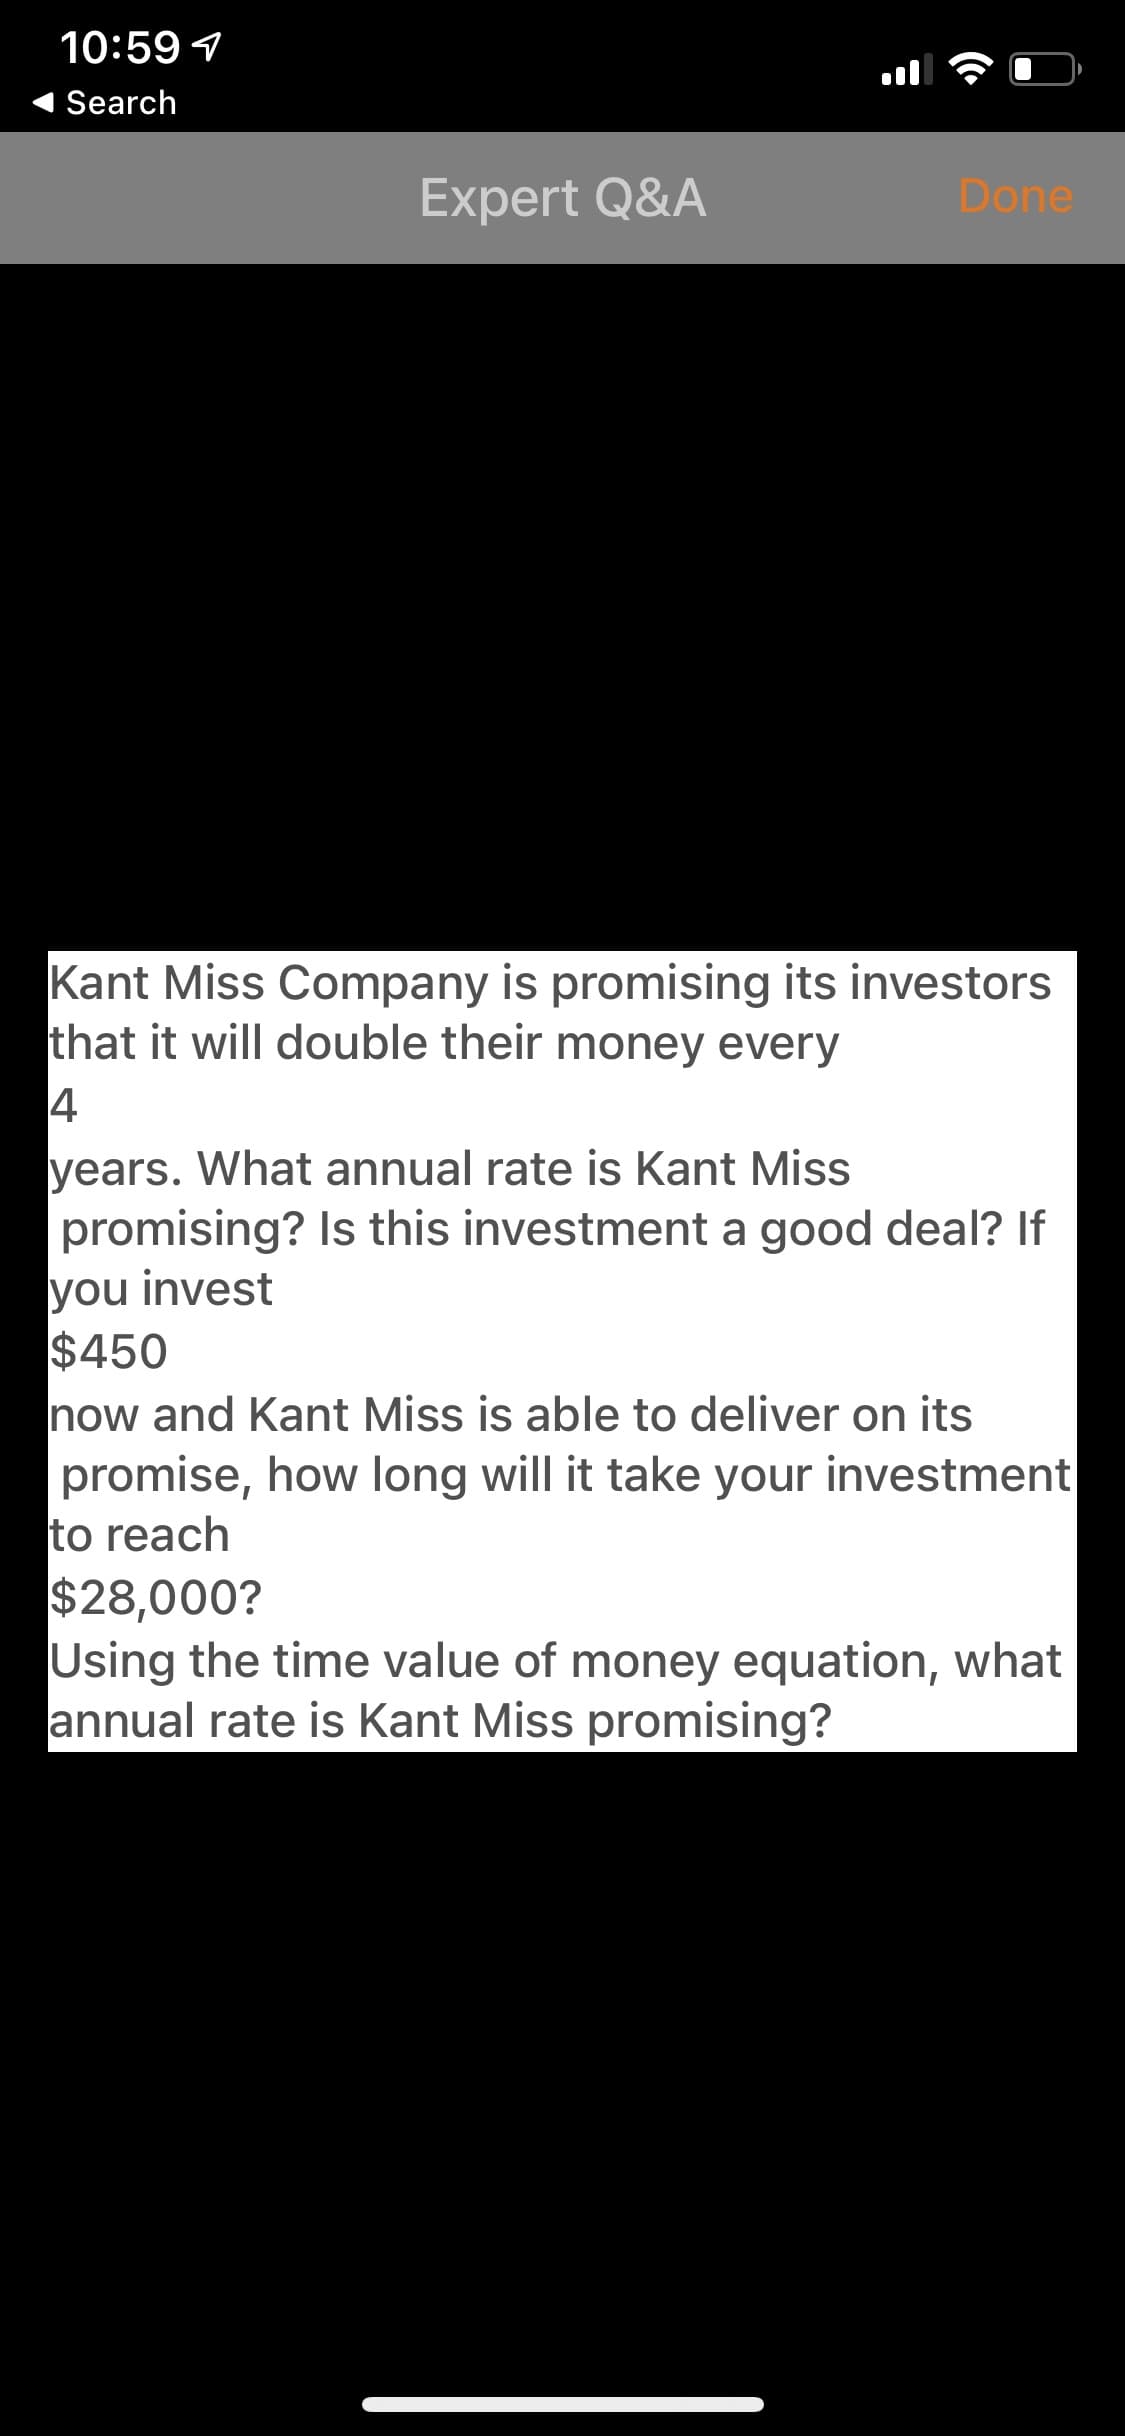 Kant Miss Company is promising its investors
that it will double their money every
4
years. What annual rate is Kant Miss
promising? Is this investment a good deal? If
you invest
$450
now and Kant Miss is able to deliver on its
promise, how long will it take your investment
to reach
$28,000?
Using the time value of money equation, what
annual rate is Kant Miss promising?
